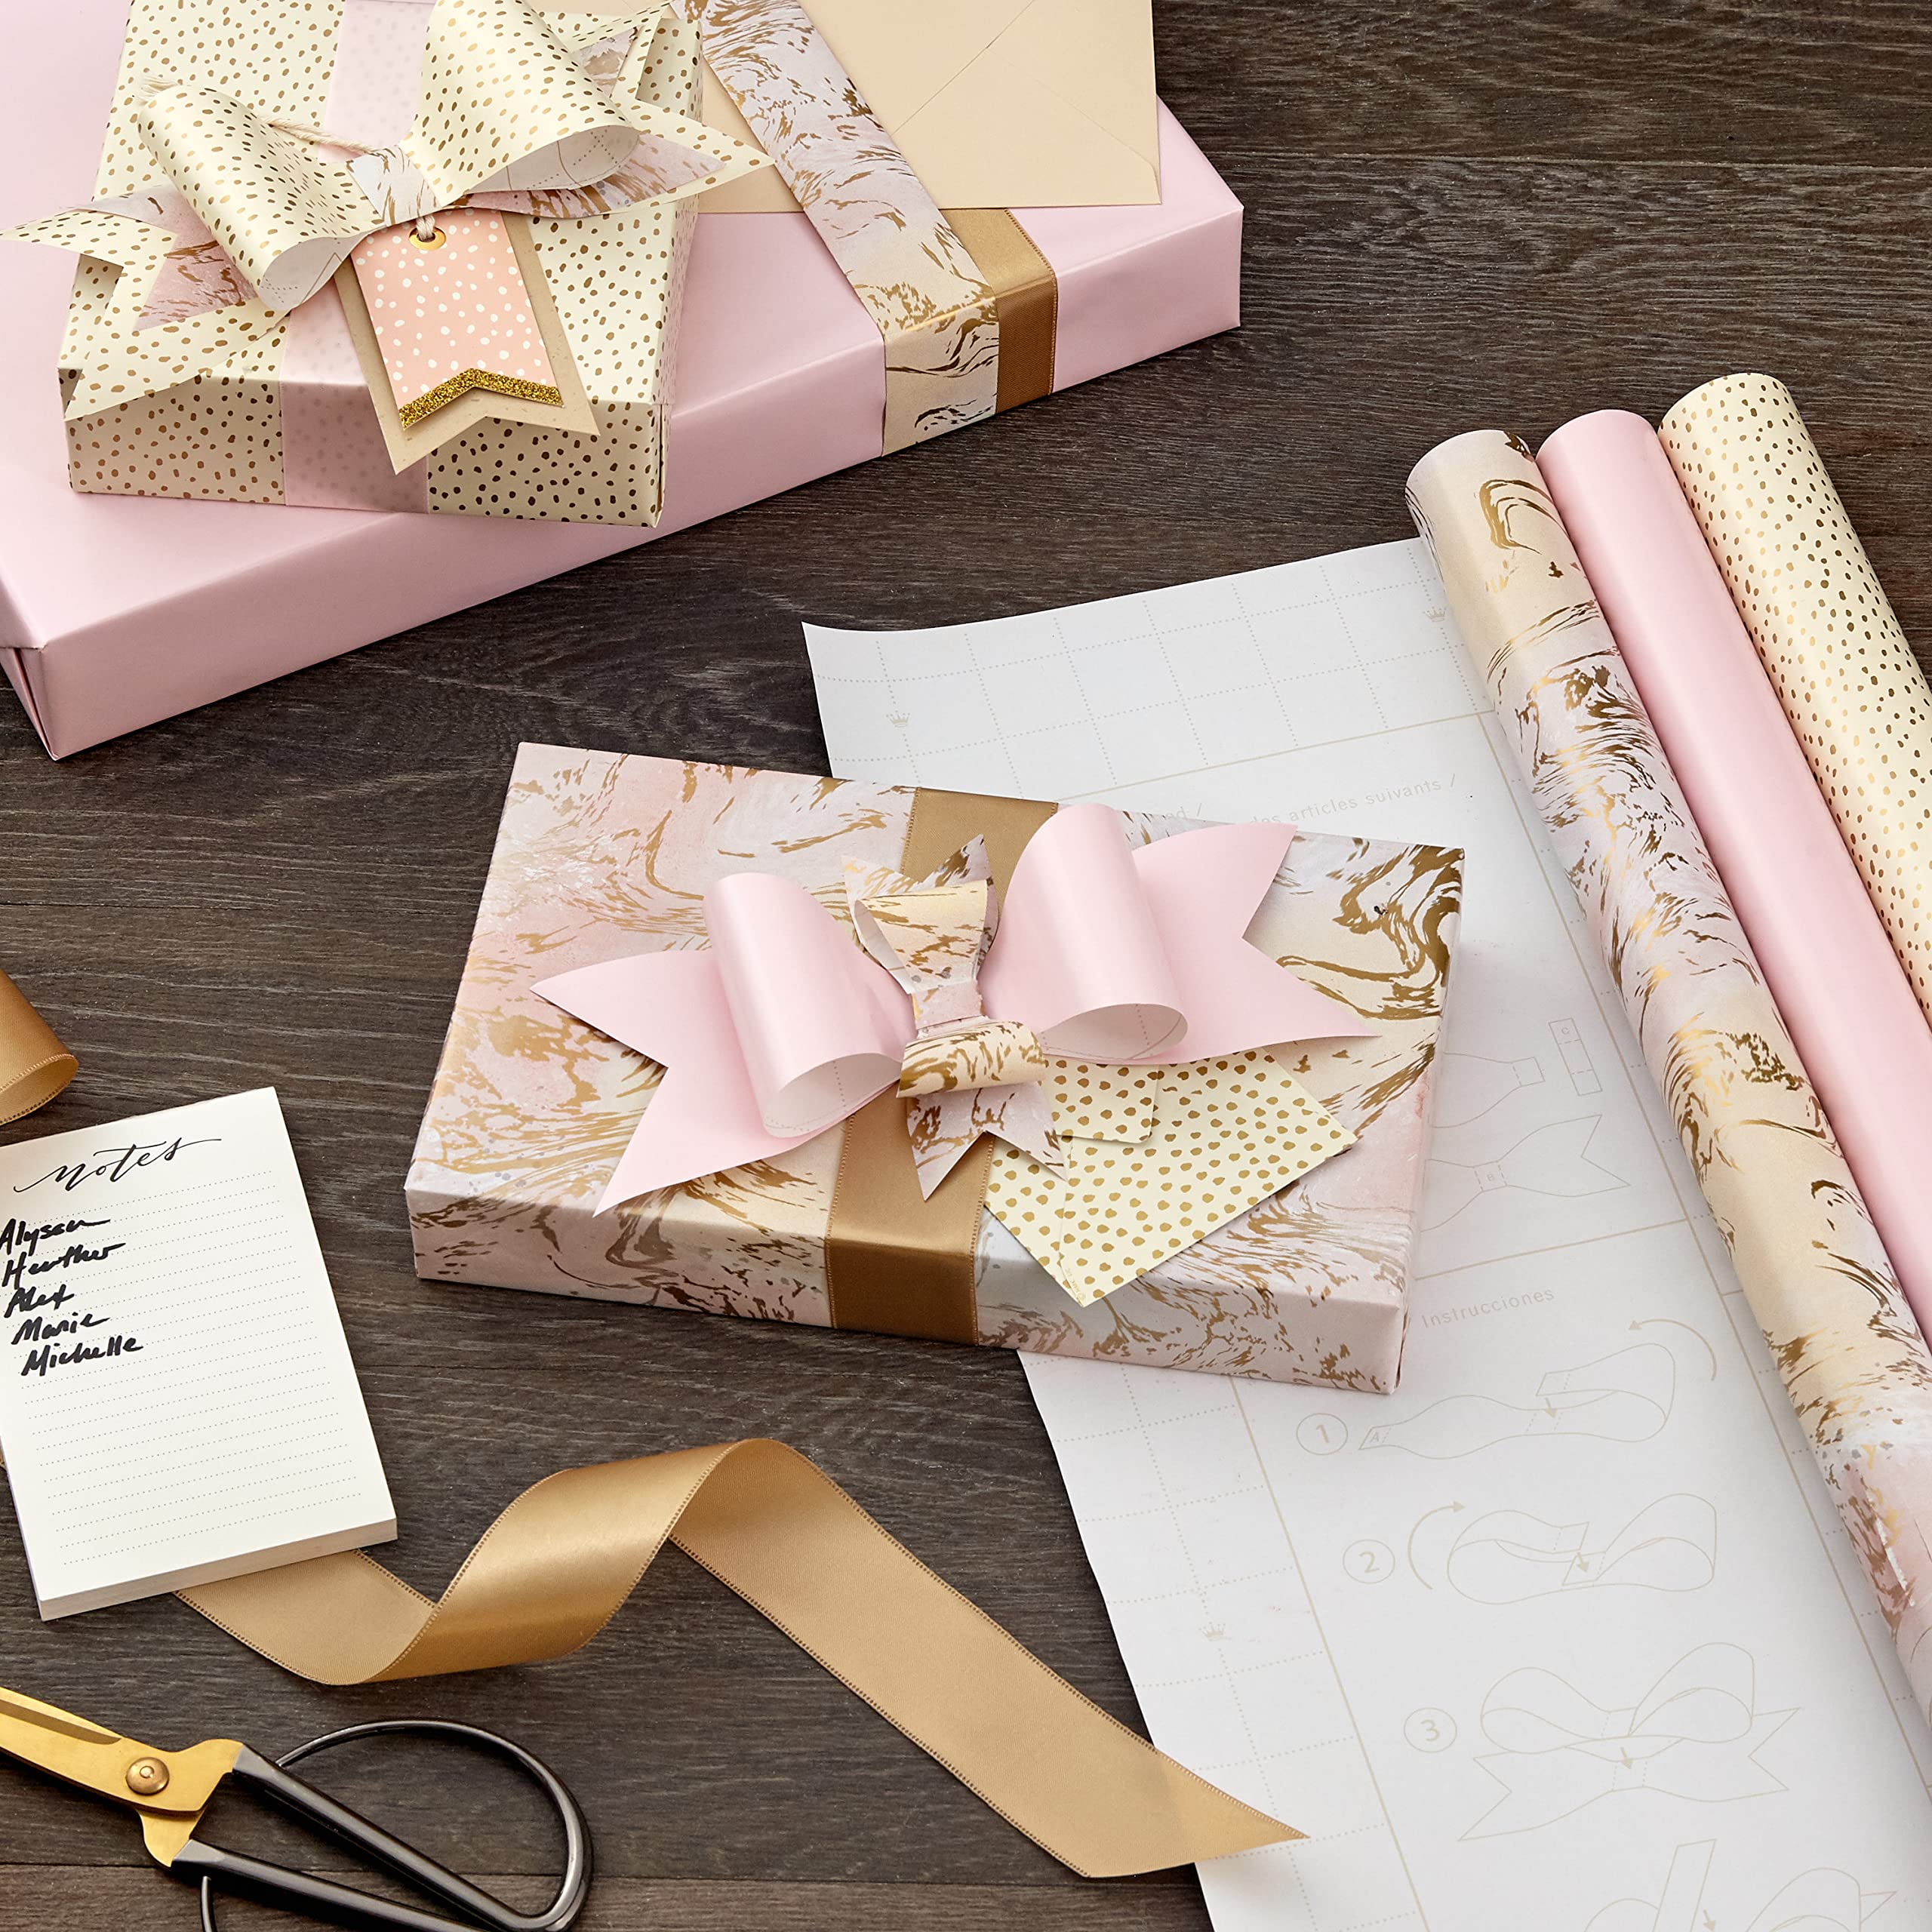 Hallmark Wrapping Paper with Cutlines on Reverse (6 Rolls: 135 Square Feet Total) Pink, Gold, Stripes, Kraft Brown, Black and White Plaid for Birthdays, Baby Showers, Bridal Showers, Mother's Day